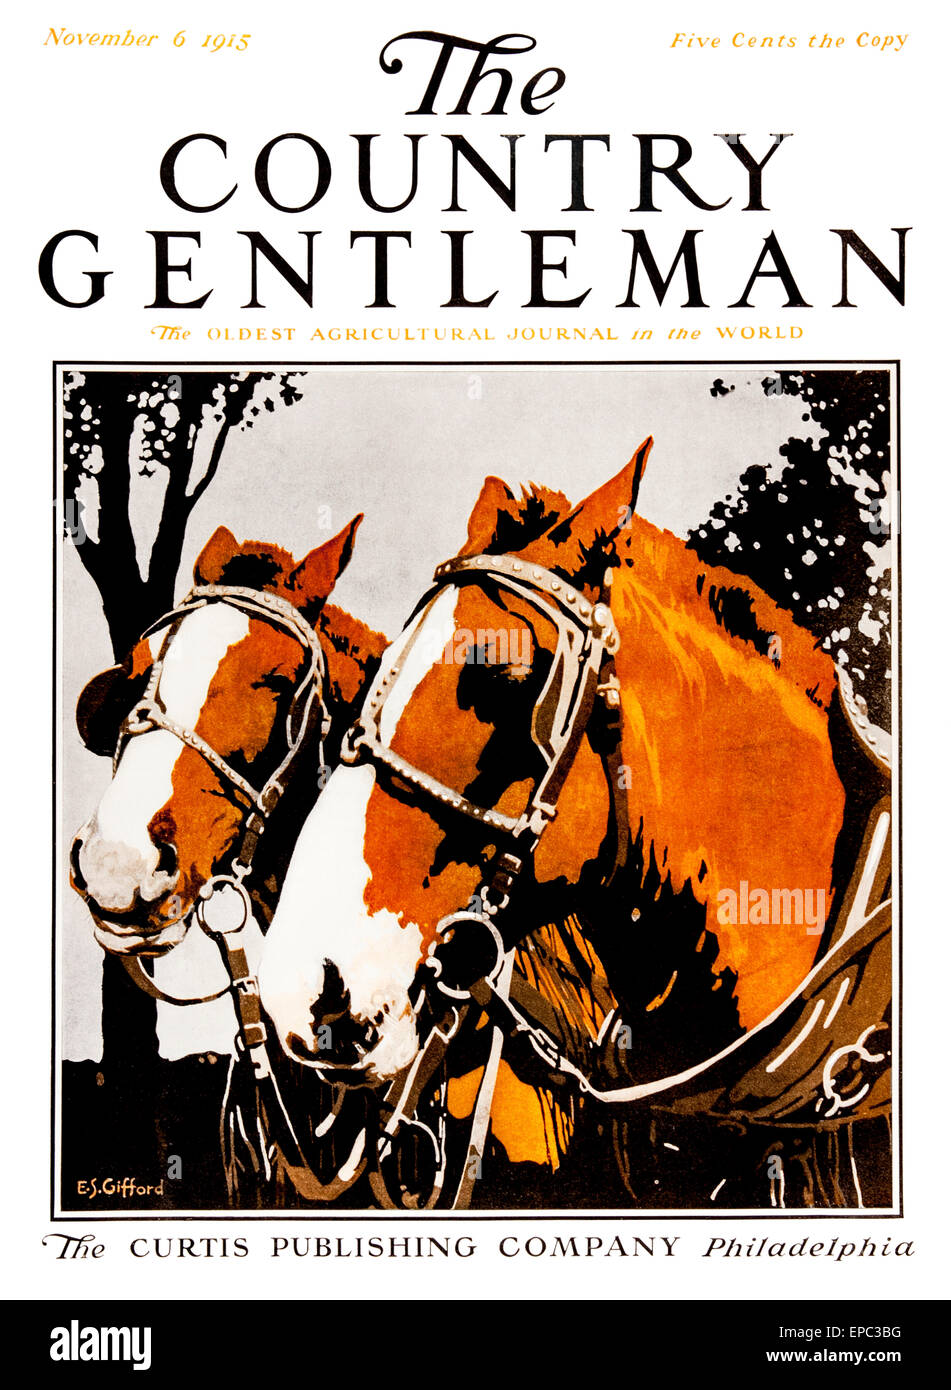 Country gentlemen. Country Gentleman. The Country Gentleman Magazine Cover. The Country Gentleman обложки журналов. The Country Gentleman July 31 1915 обложки журналов.